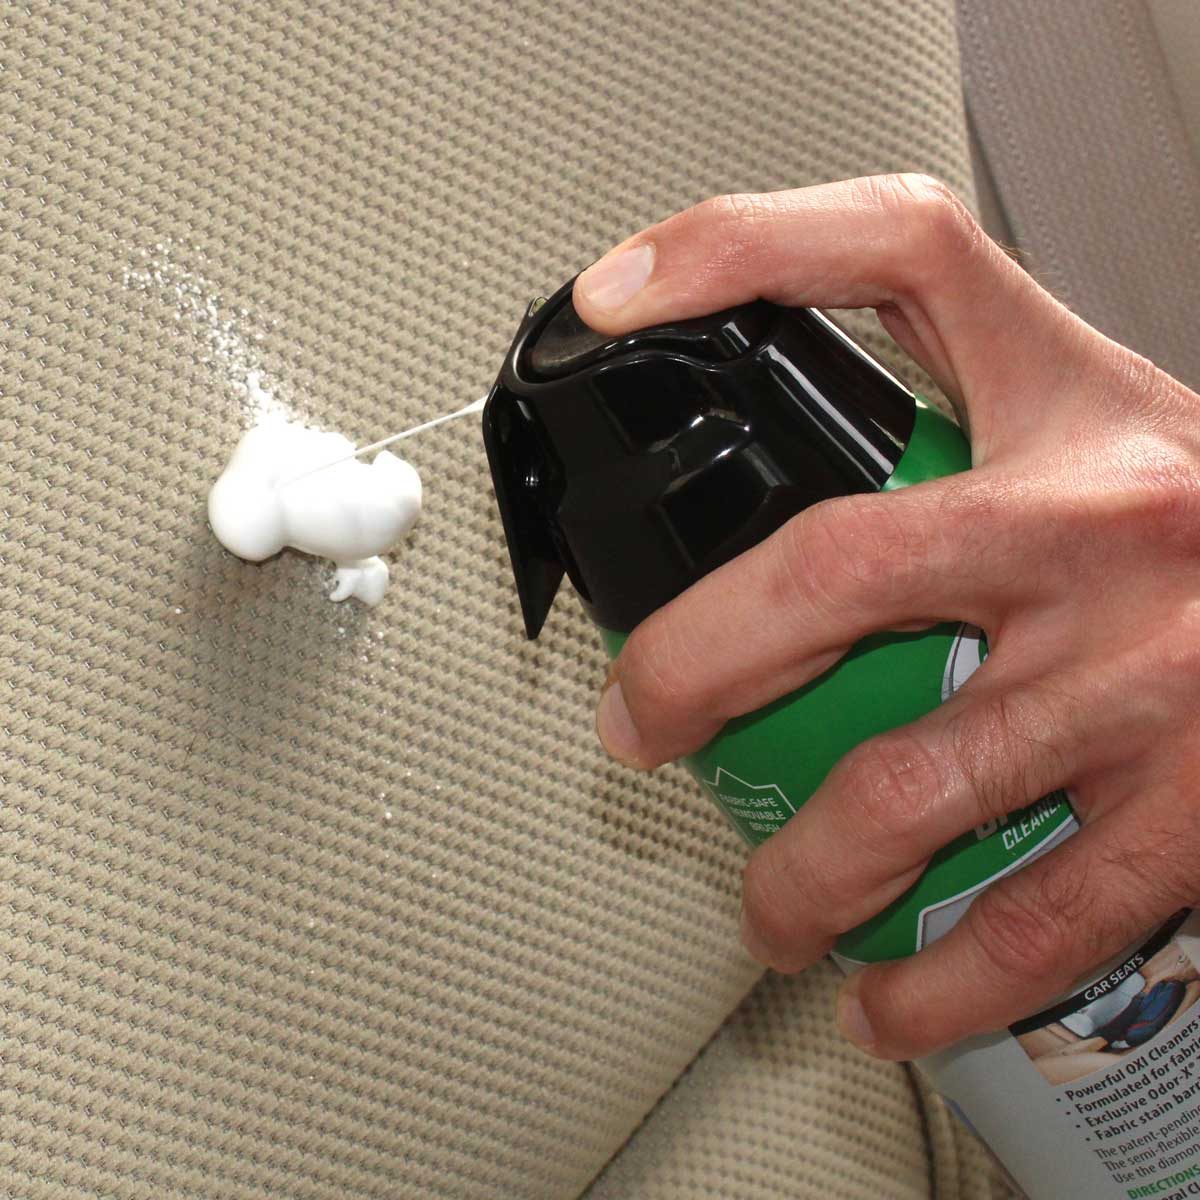 How to Clean Car Seats With OxiClean Upholstery Cleaner